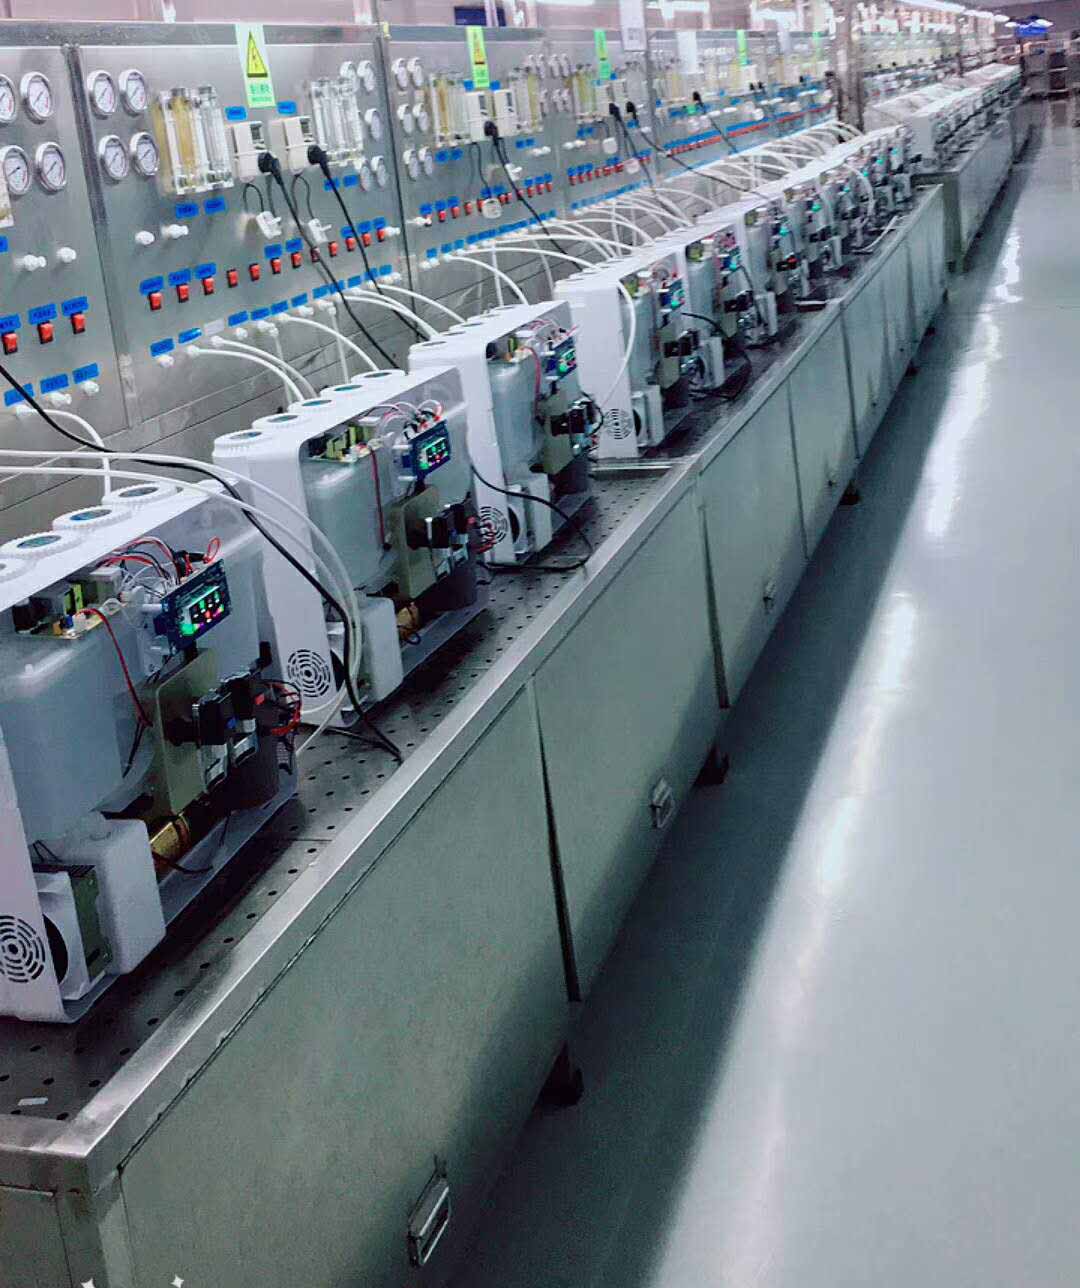 New whole house reverse osmosis water filter system production lines